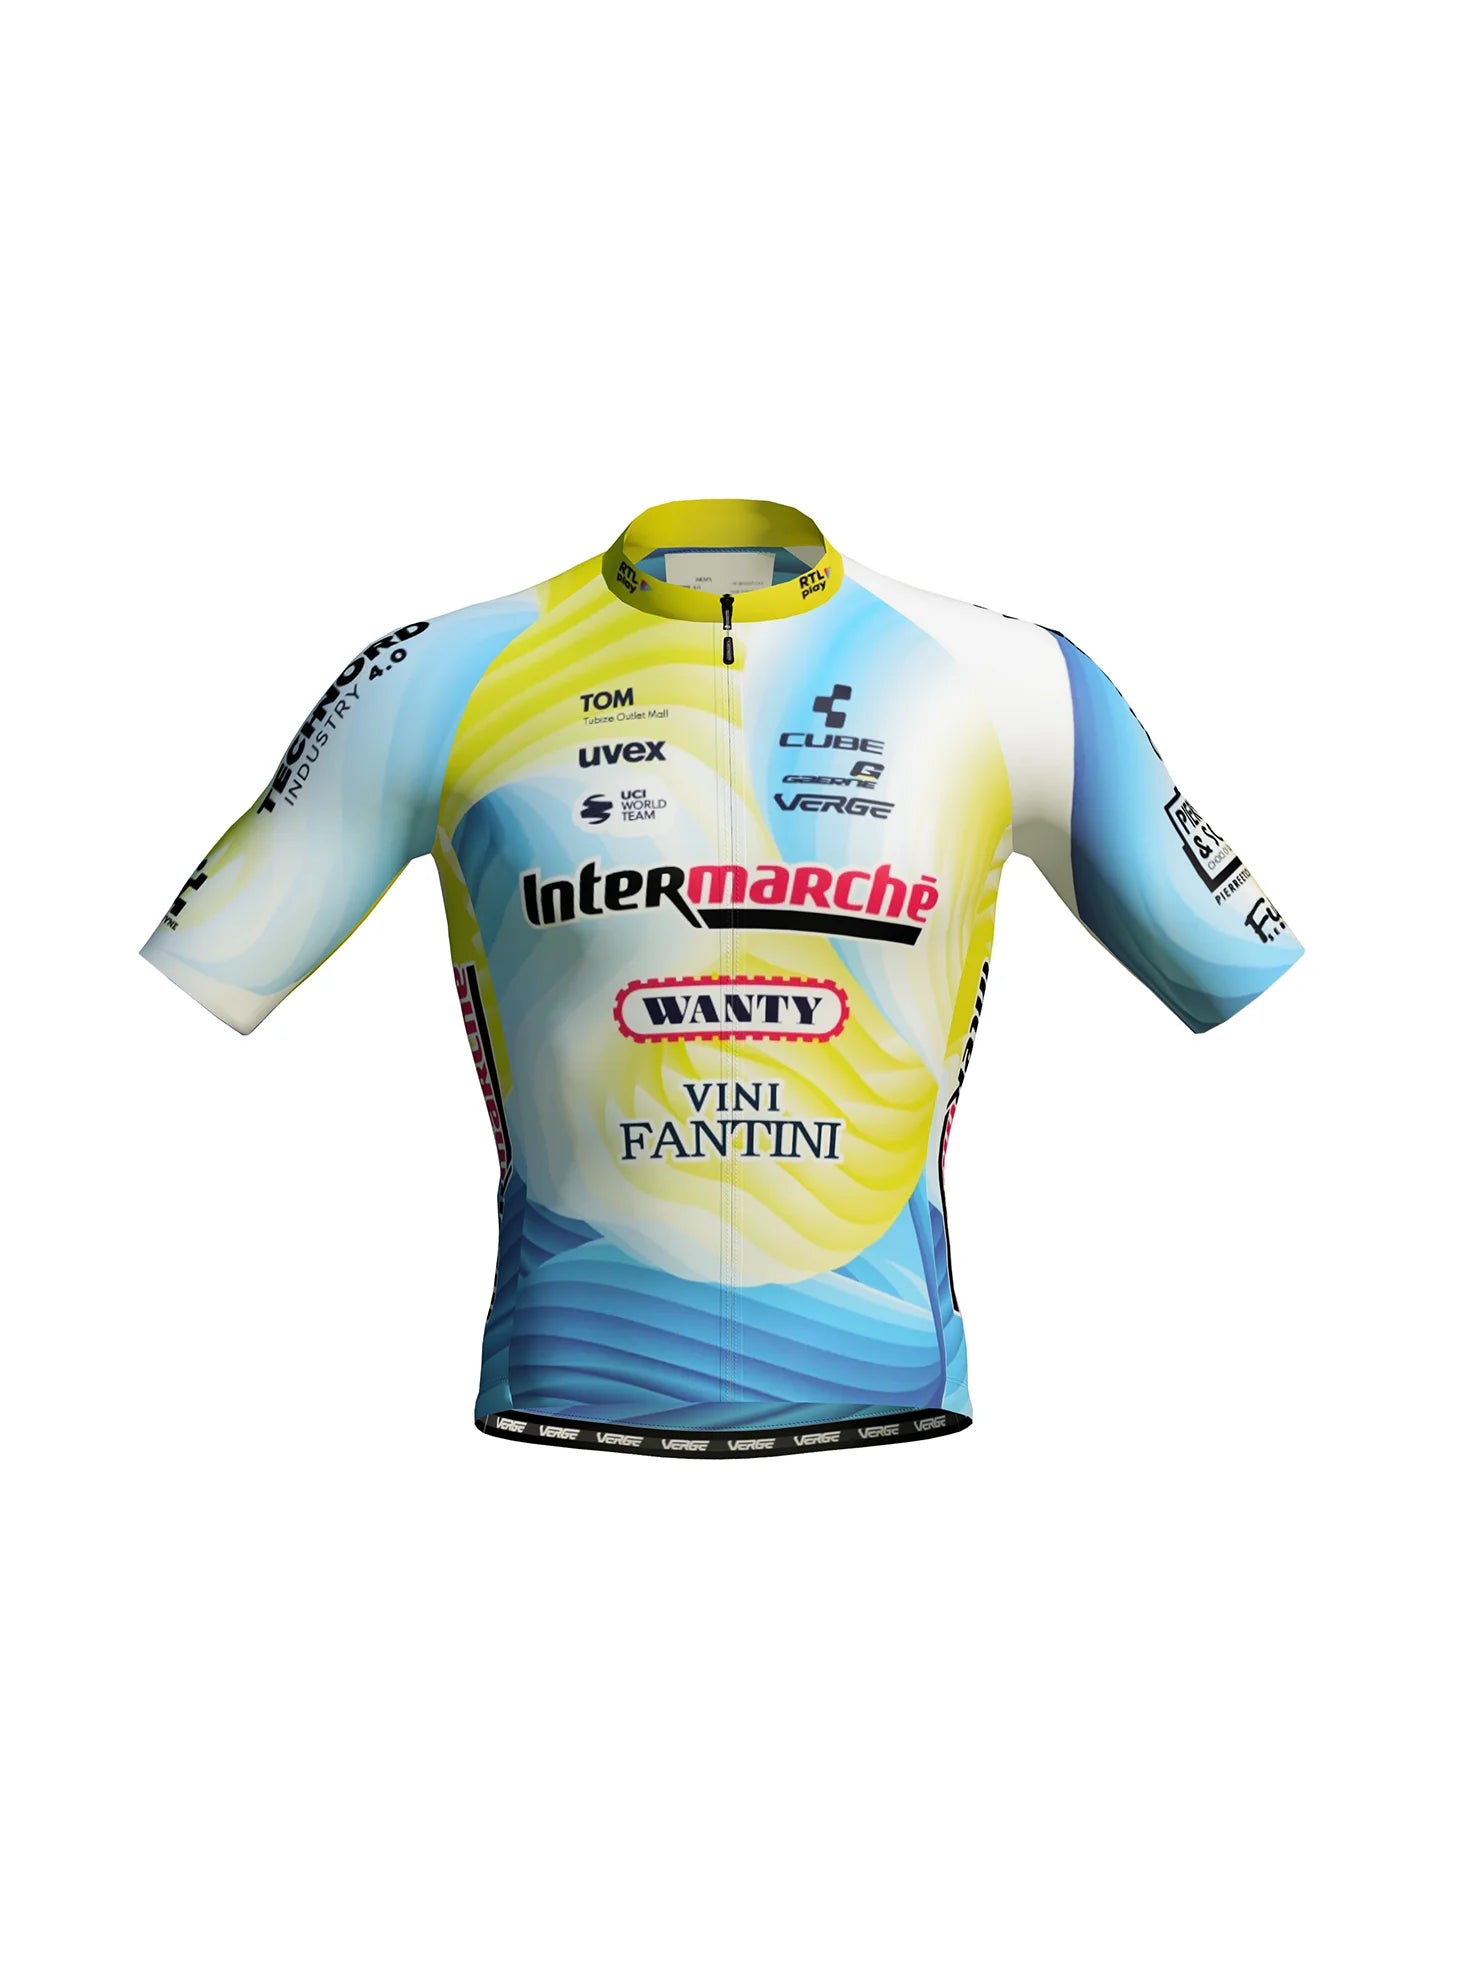 INTERMARCHÉ-WANTY LIMITED EDITION GIRO JERSEY + TOWEL